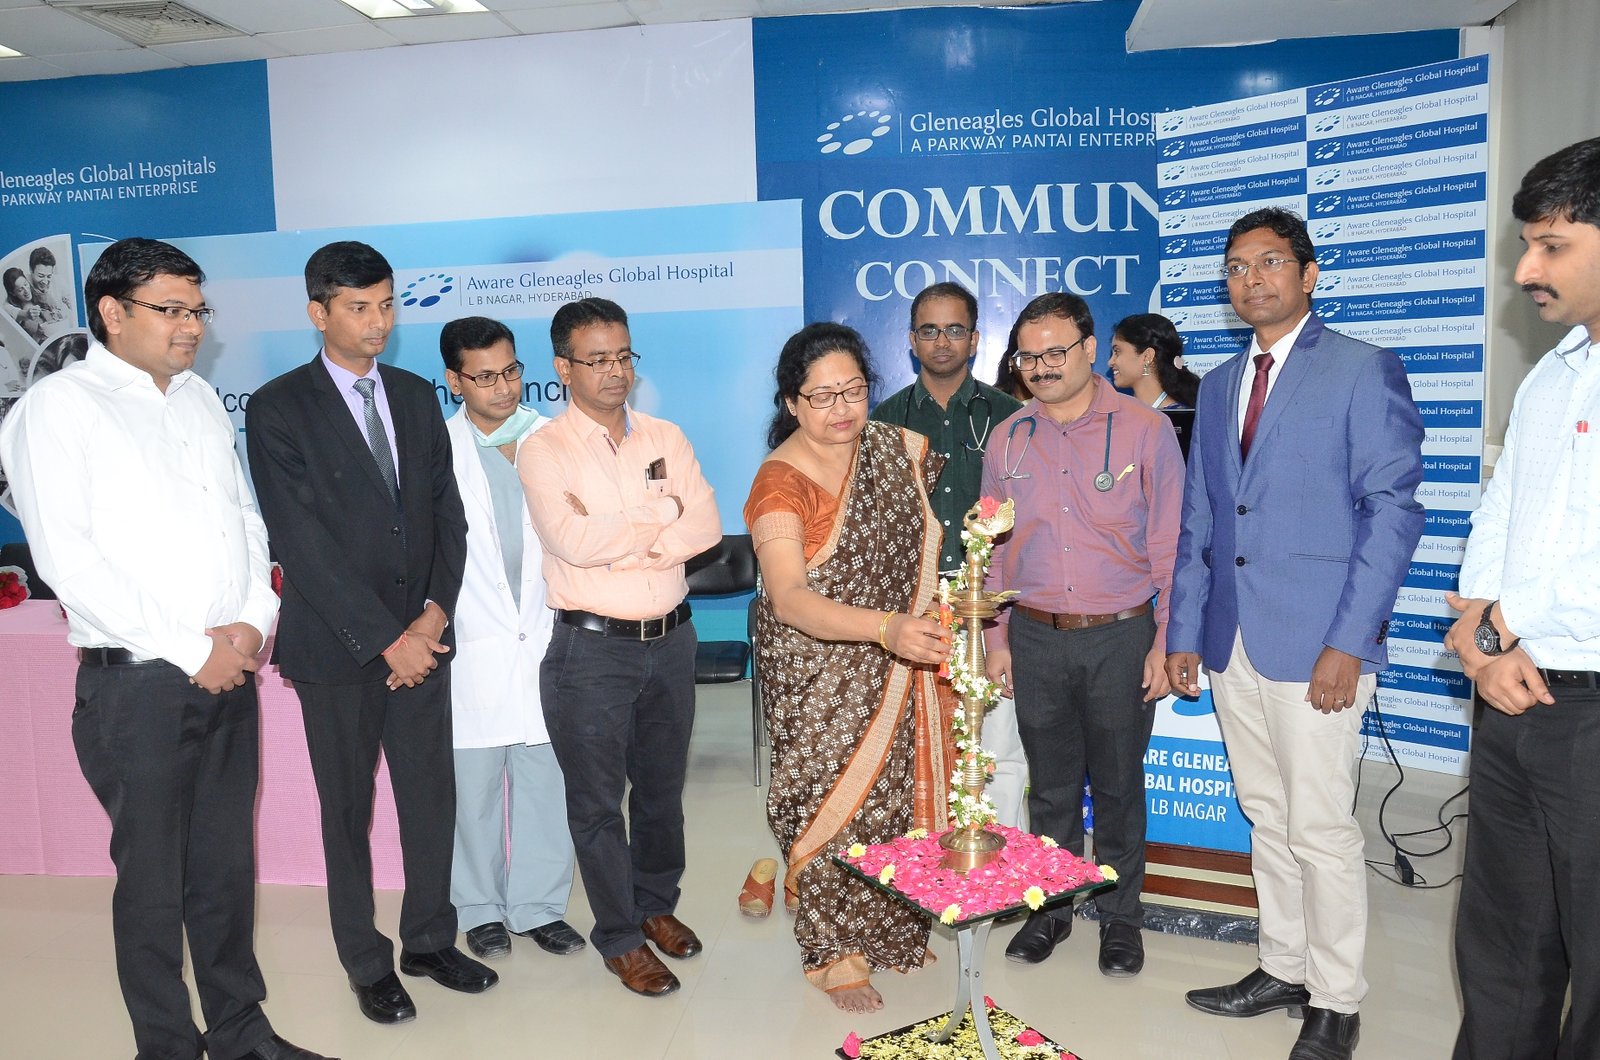 Lighting the lamp by Chief Guest Dr. Sasmita Dash,General Manager, CMO NTPC